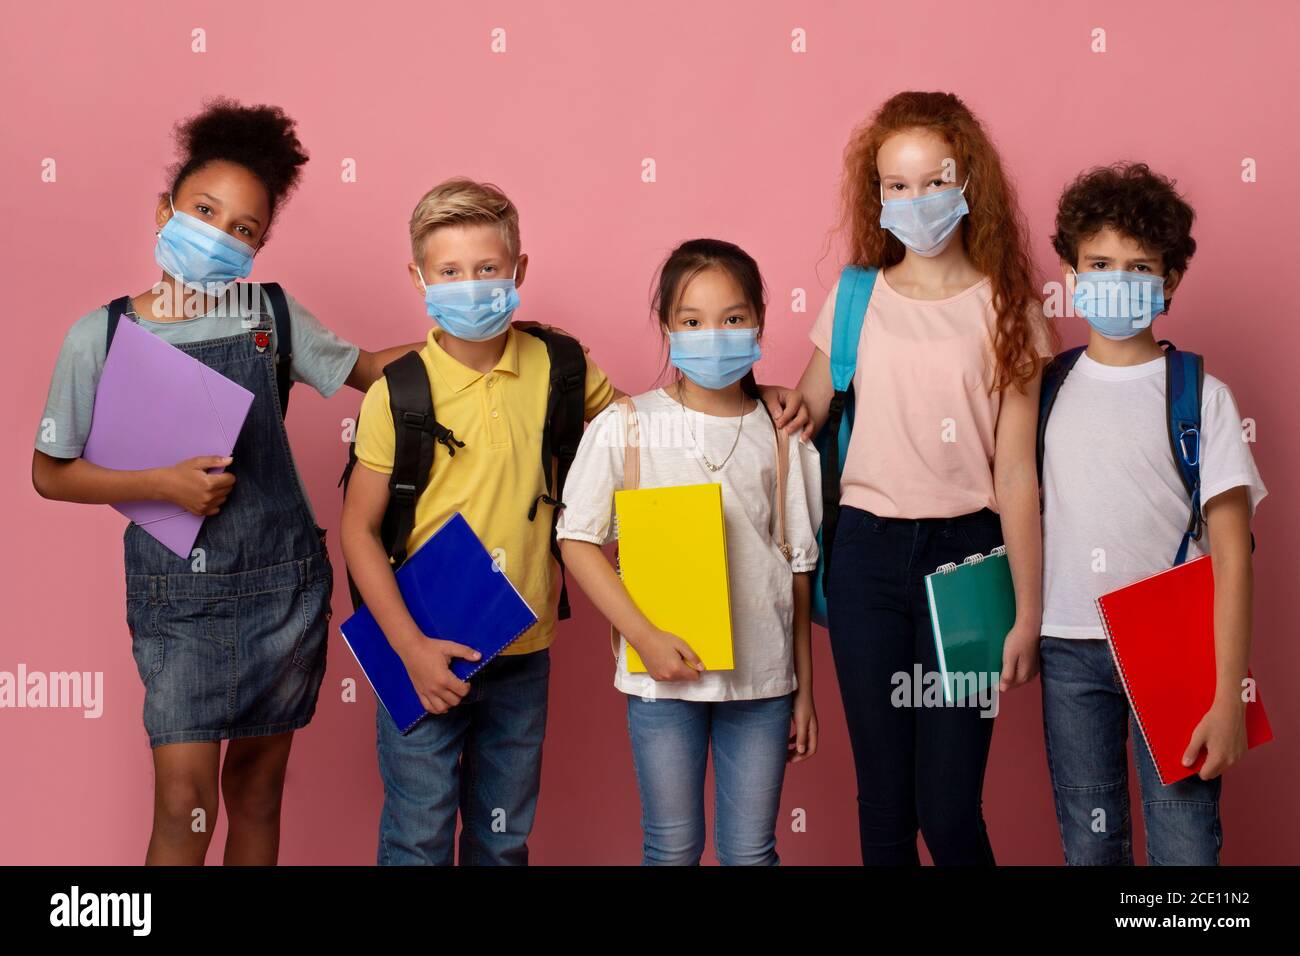 Download Kids Health Masks High Resolution Stock Photography And Images Alamy PSD Mockup Templates